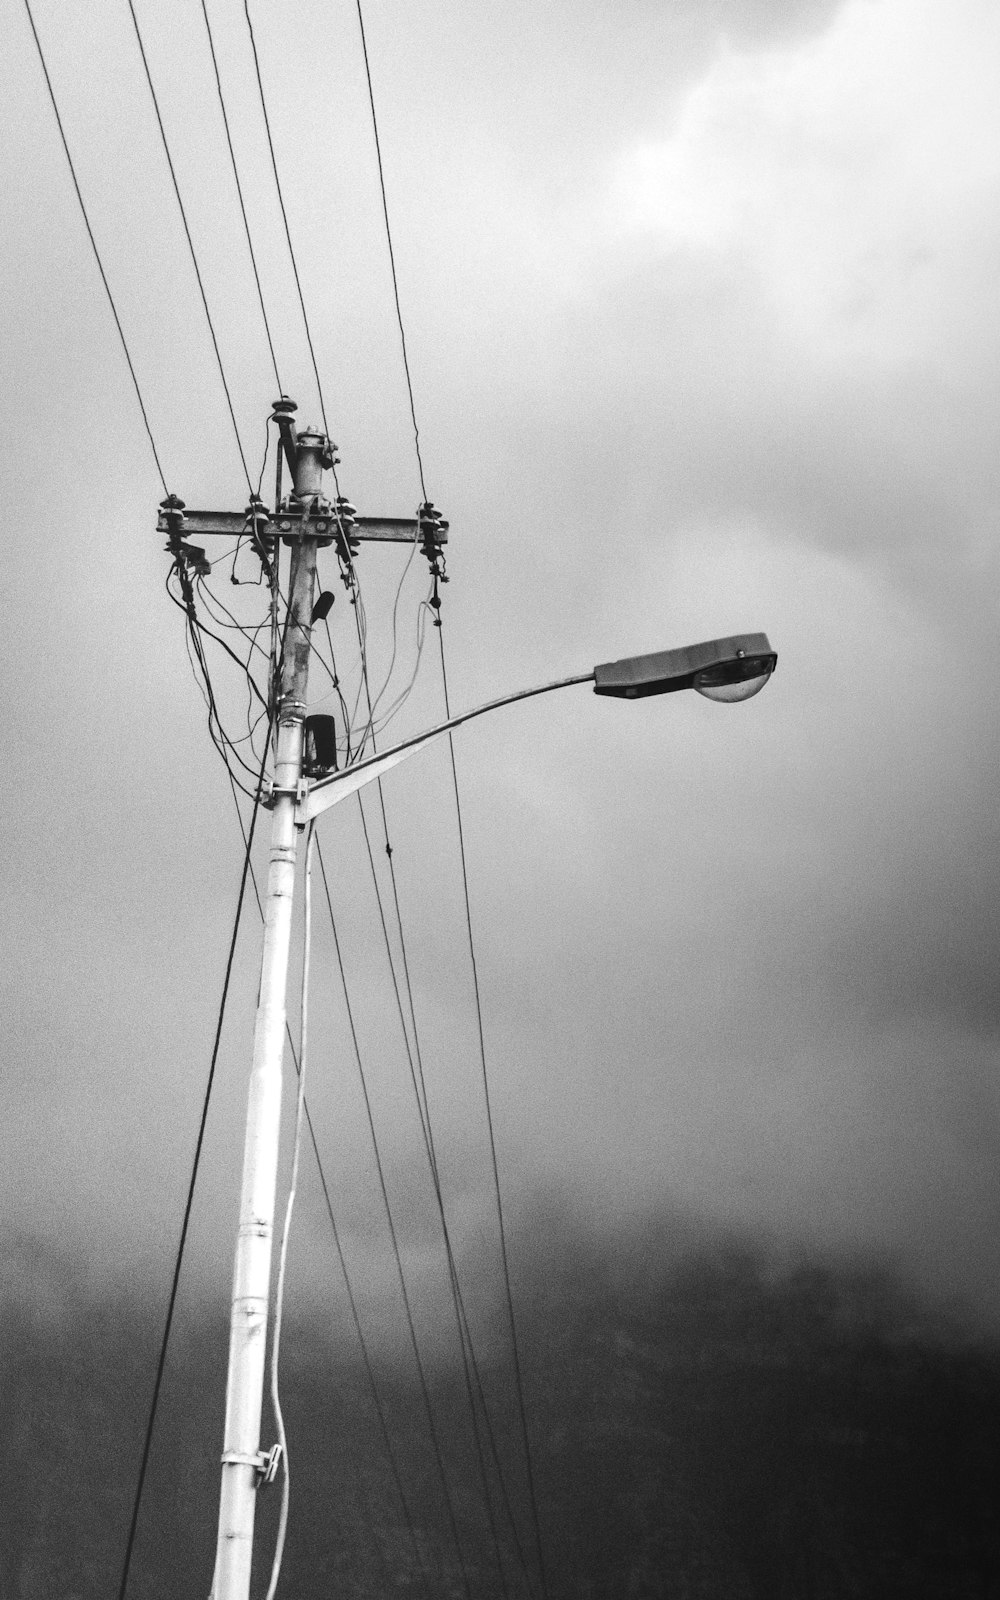 a black and white photo of power lines and wires